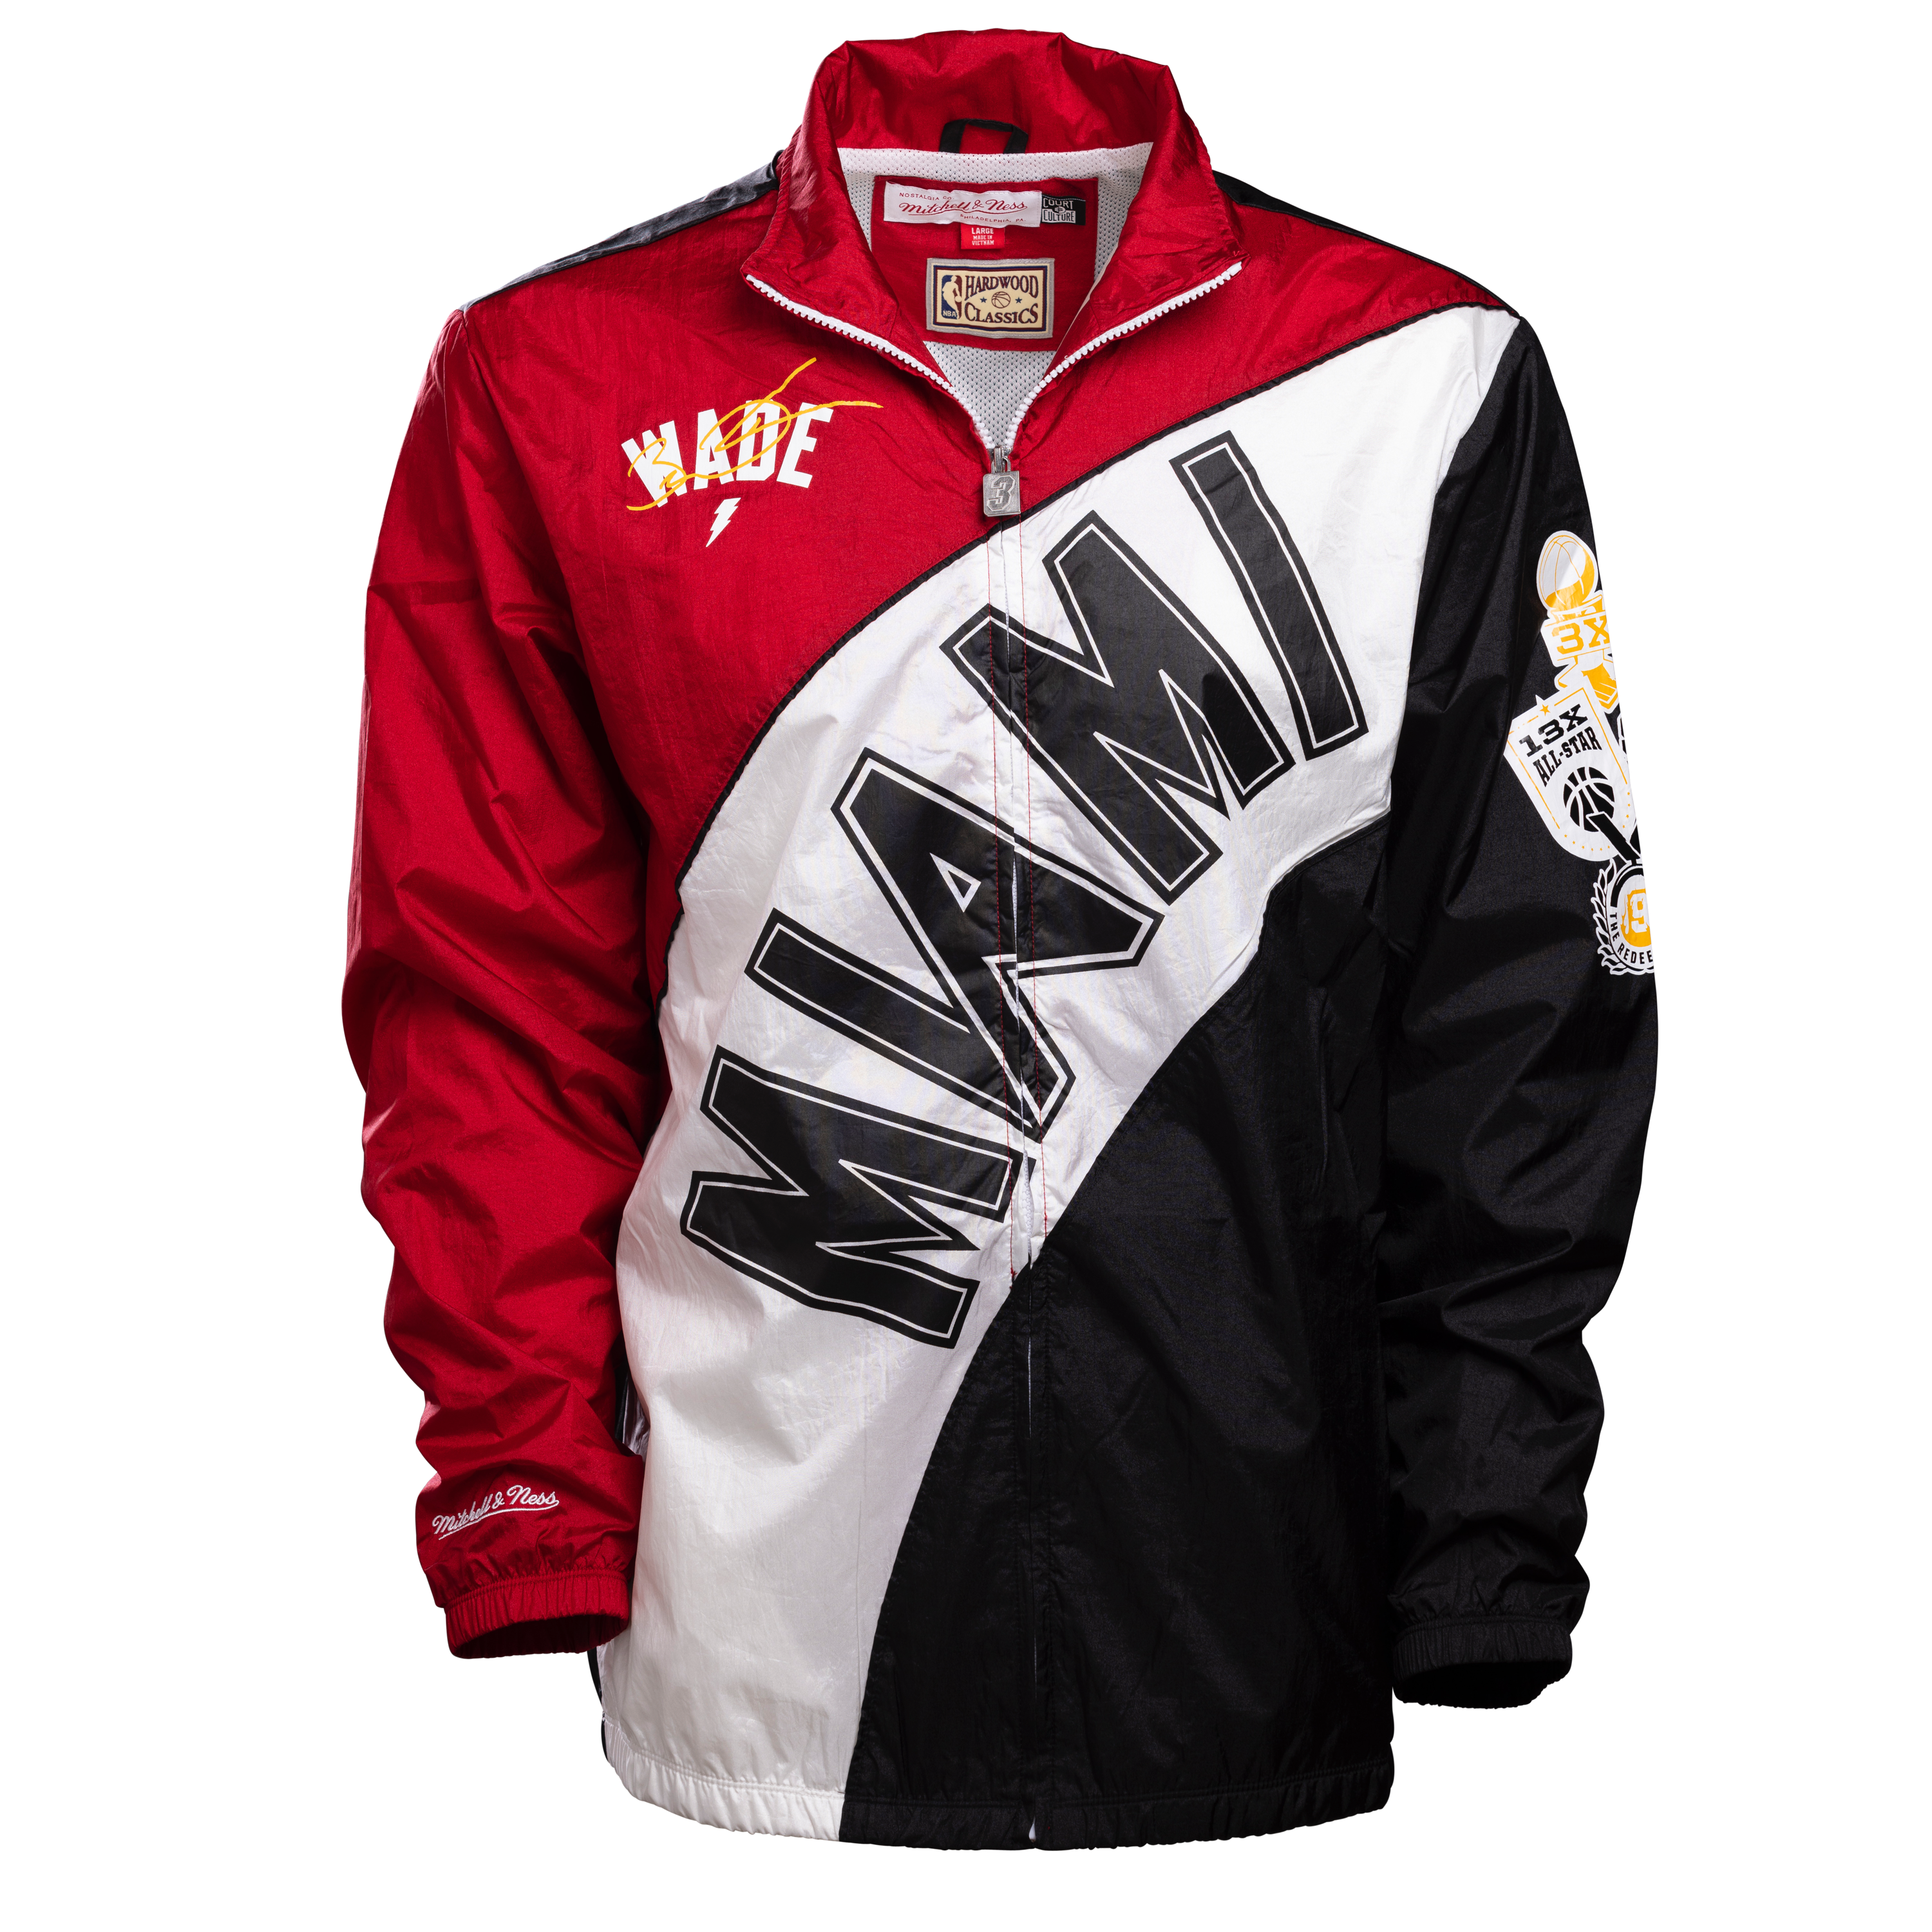 Court Culture x Mitchell and Ness Wade HOF Warm-Up Jacket – Miami HEAT Store